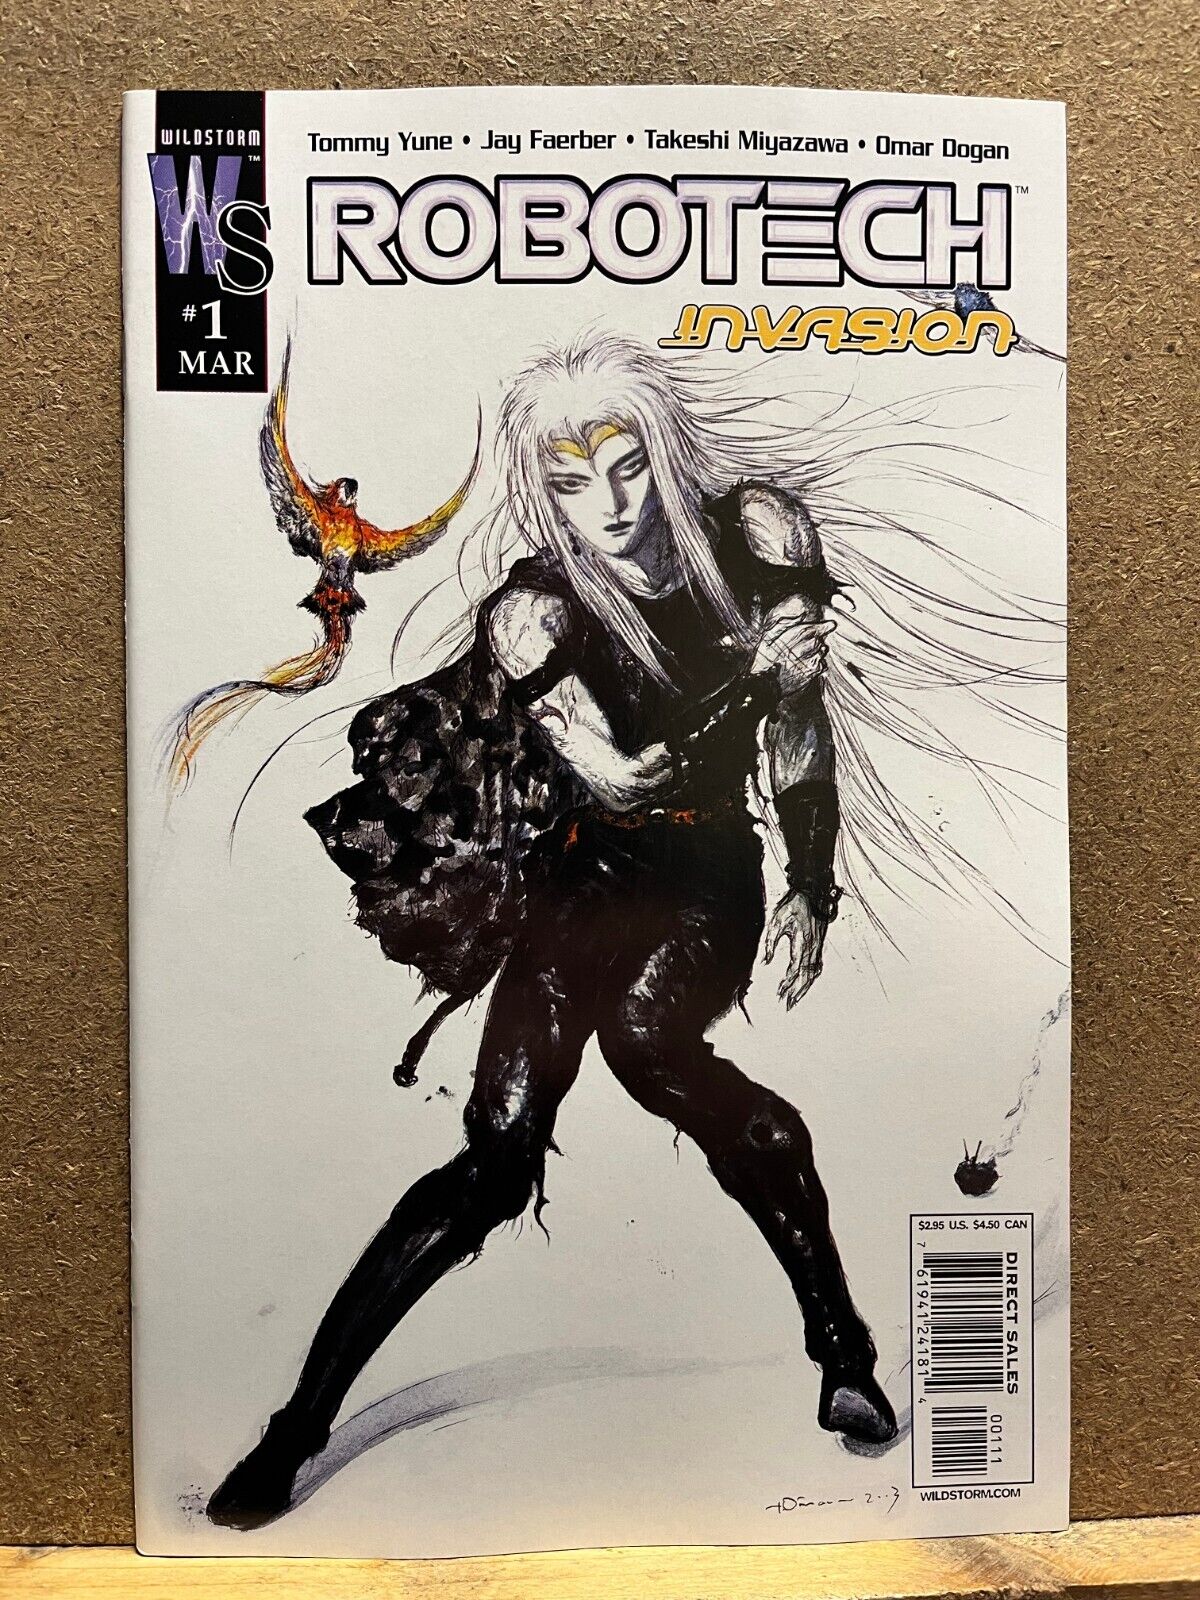 ROBOTECH : INVASION - # 1 - MARCH 2004 - NM